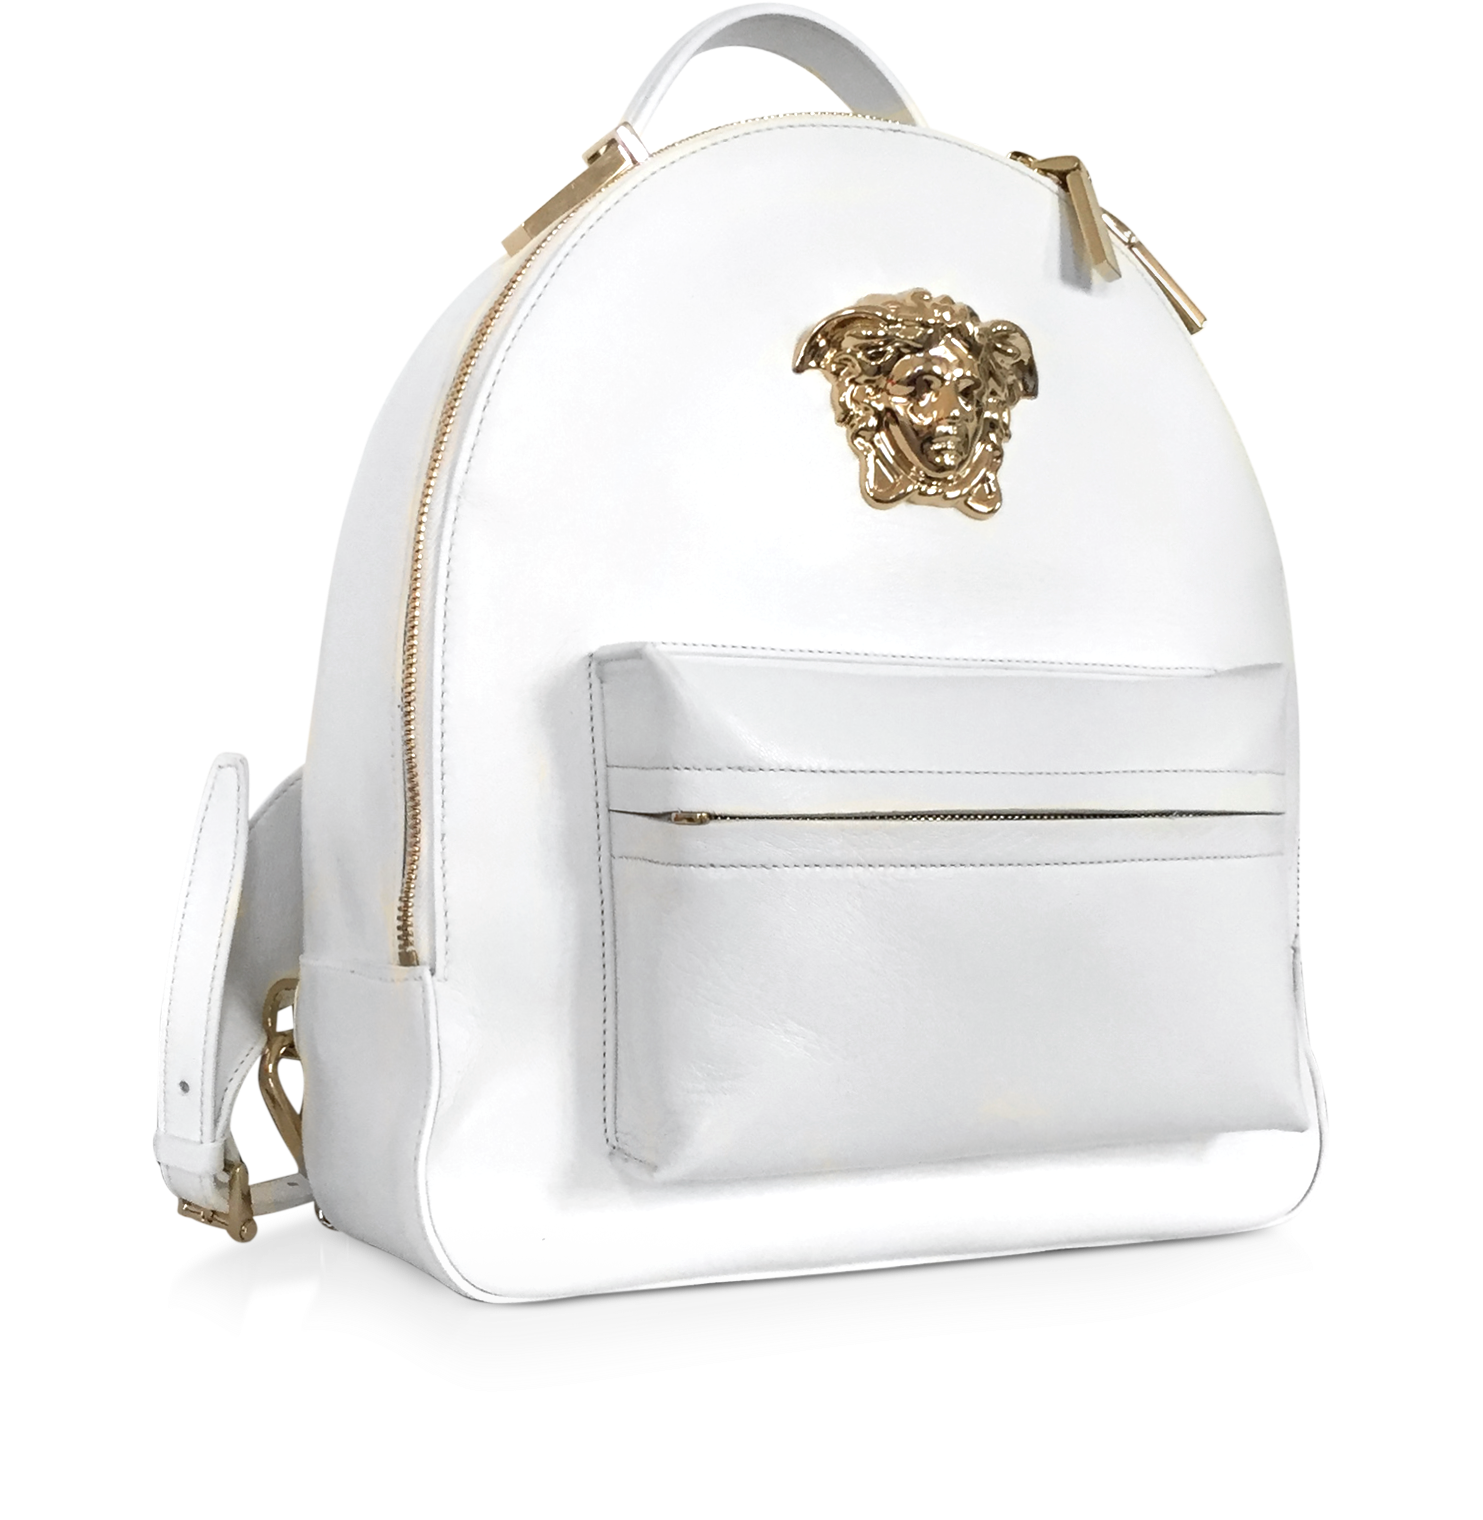 Versace Medusa Palazzo White Nappa Leather Backpack at FORZIERI